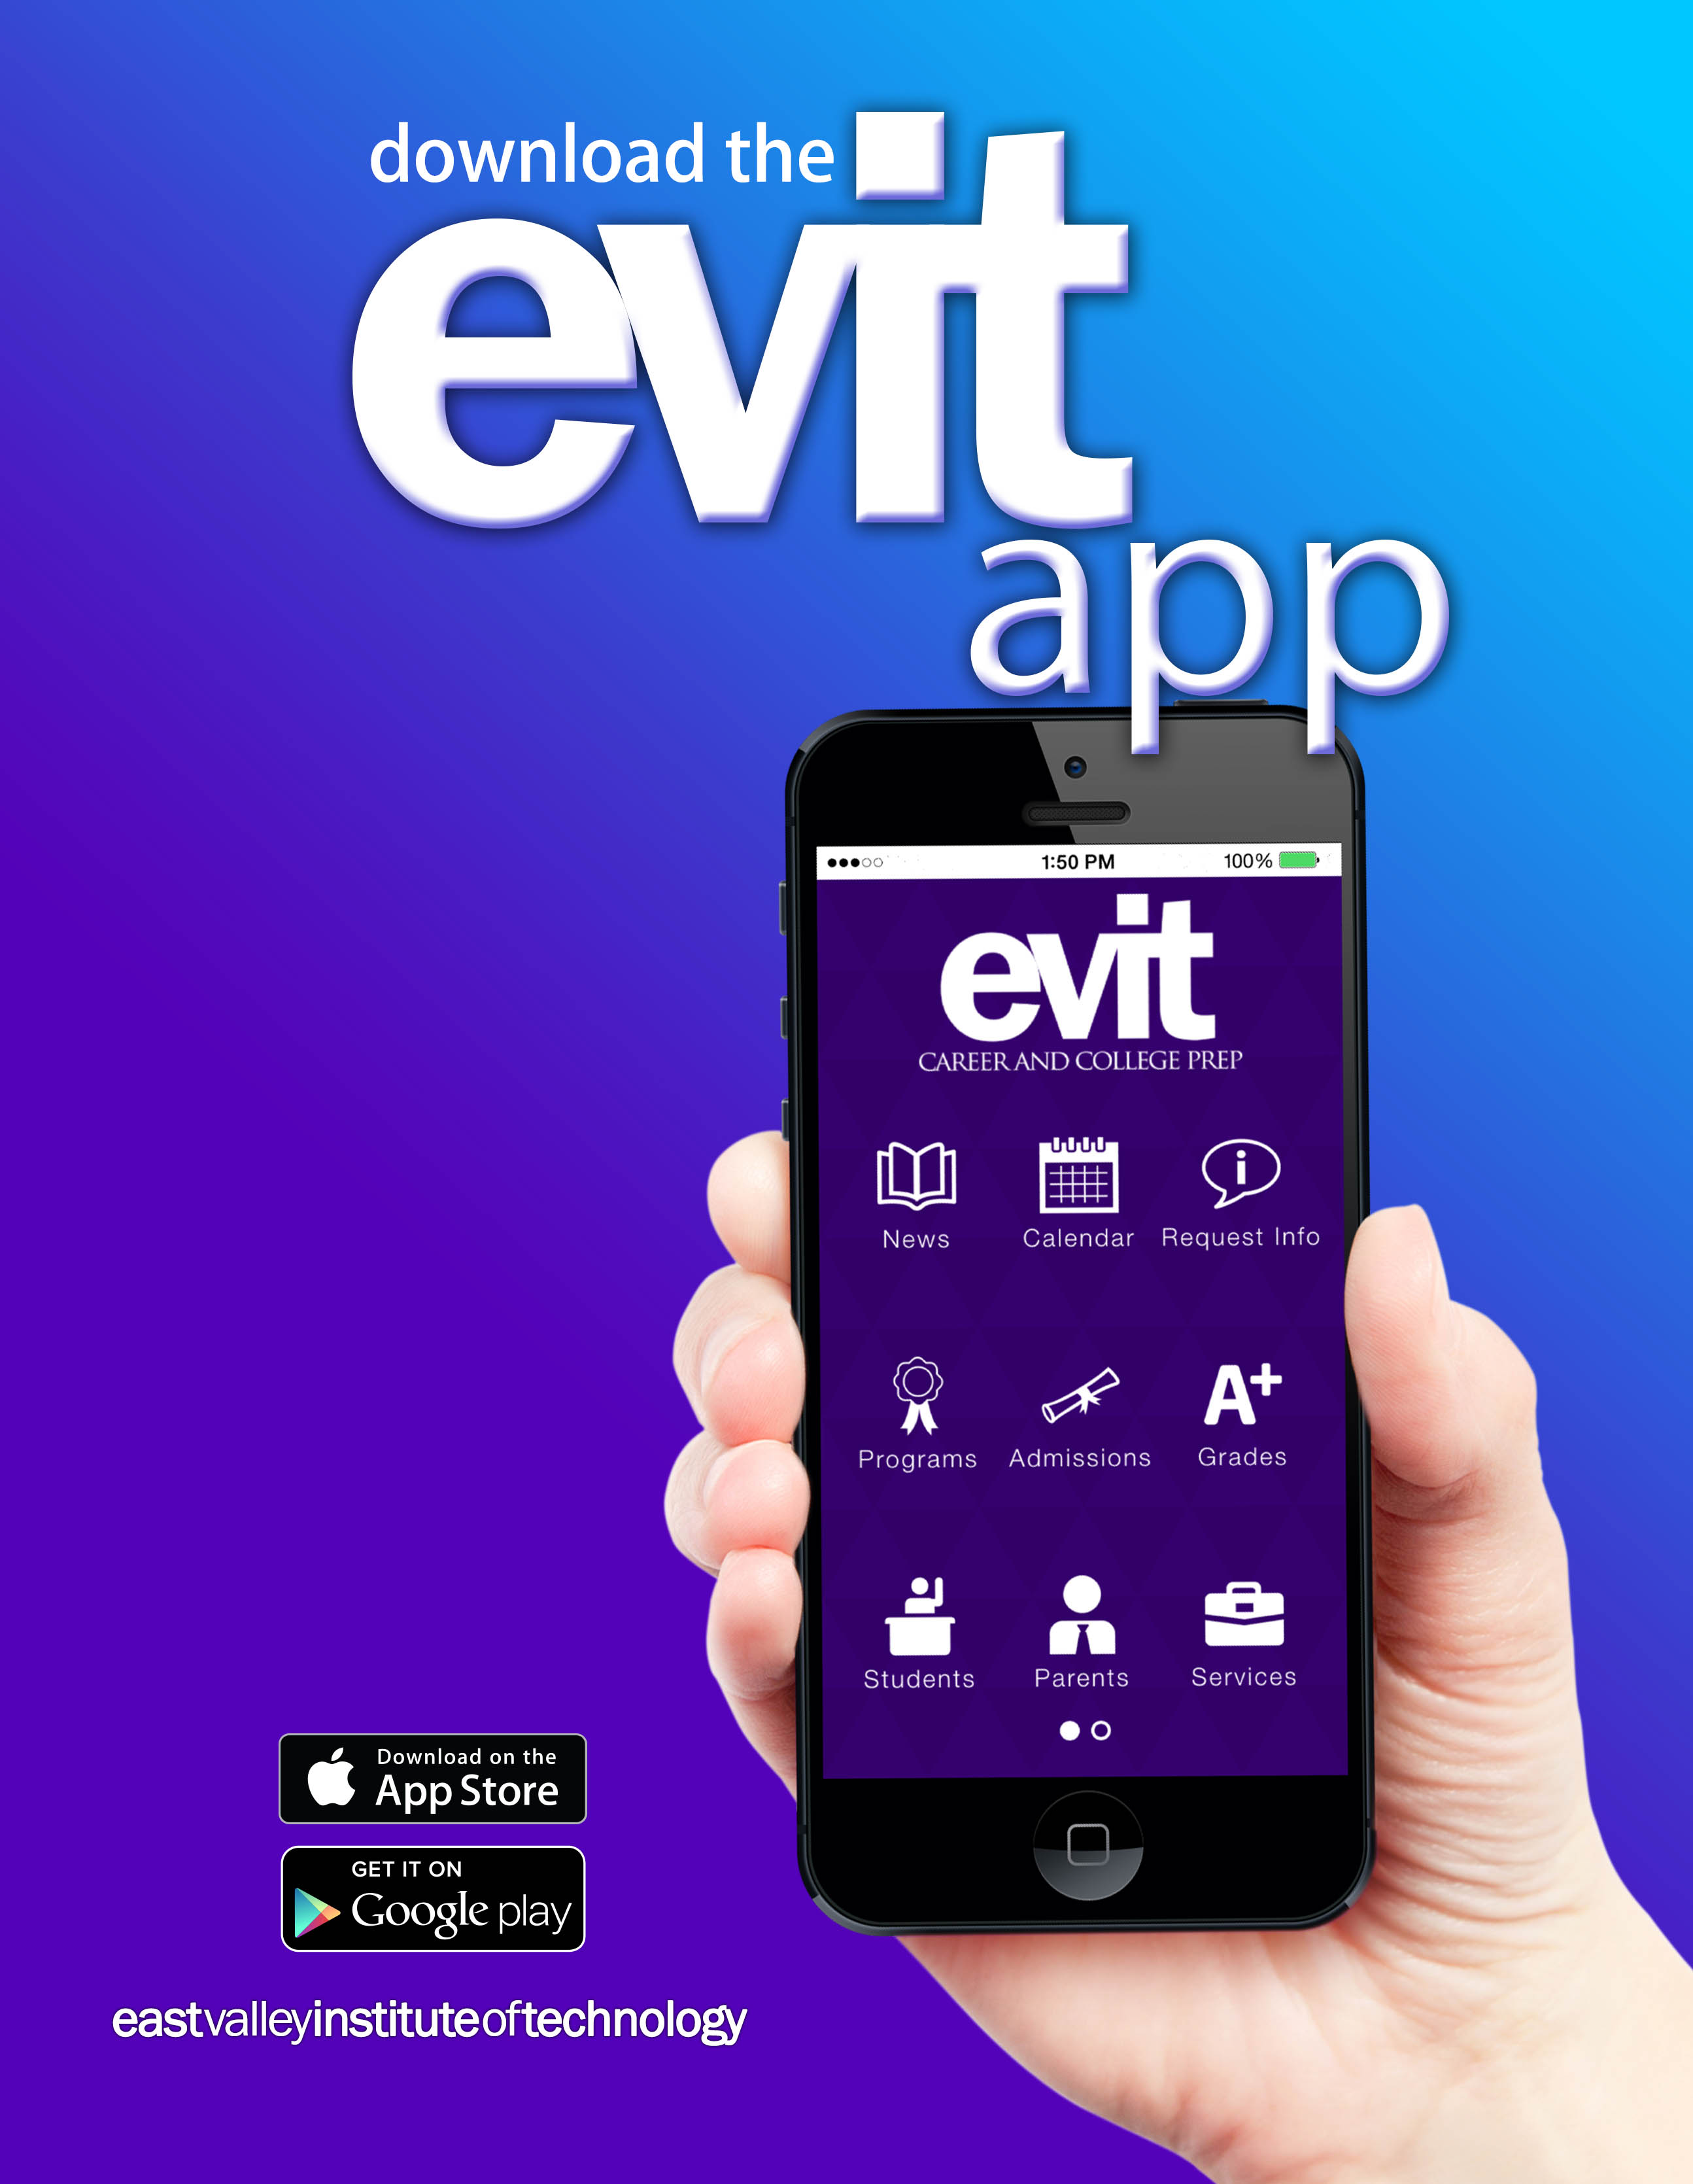 EVIT App - East Valley Institute of Technology2589 x 3339